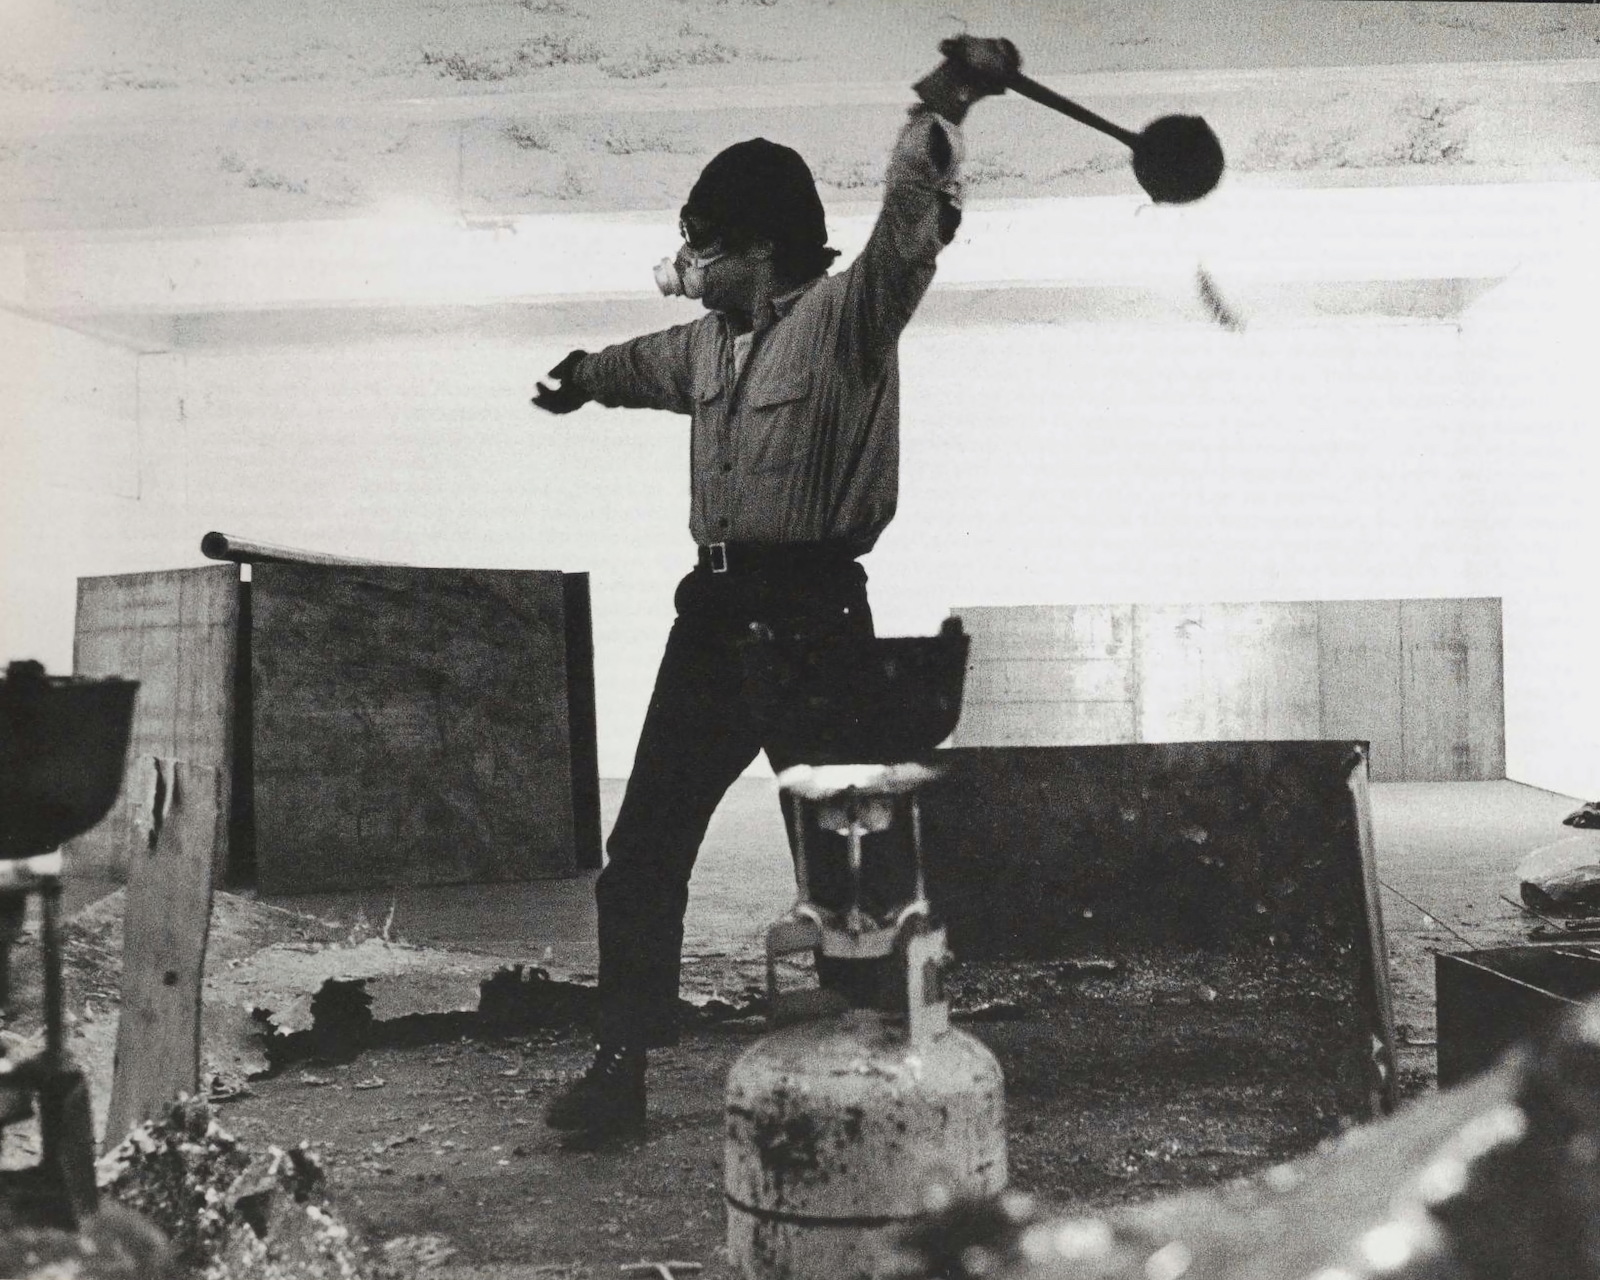 Richard Serra throwing lead, for ‘Scatter Piece’ (1967)